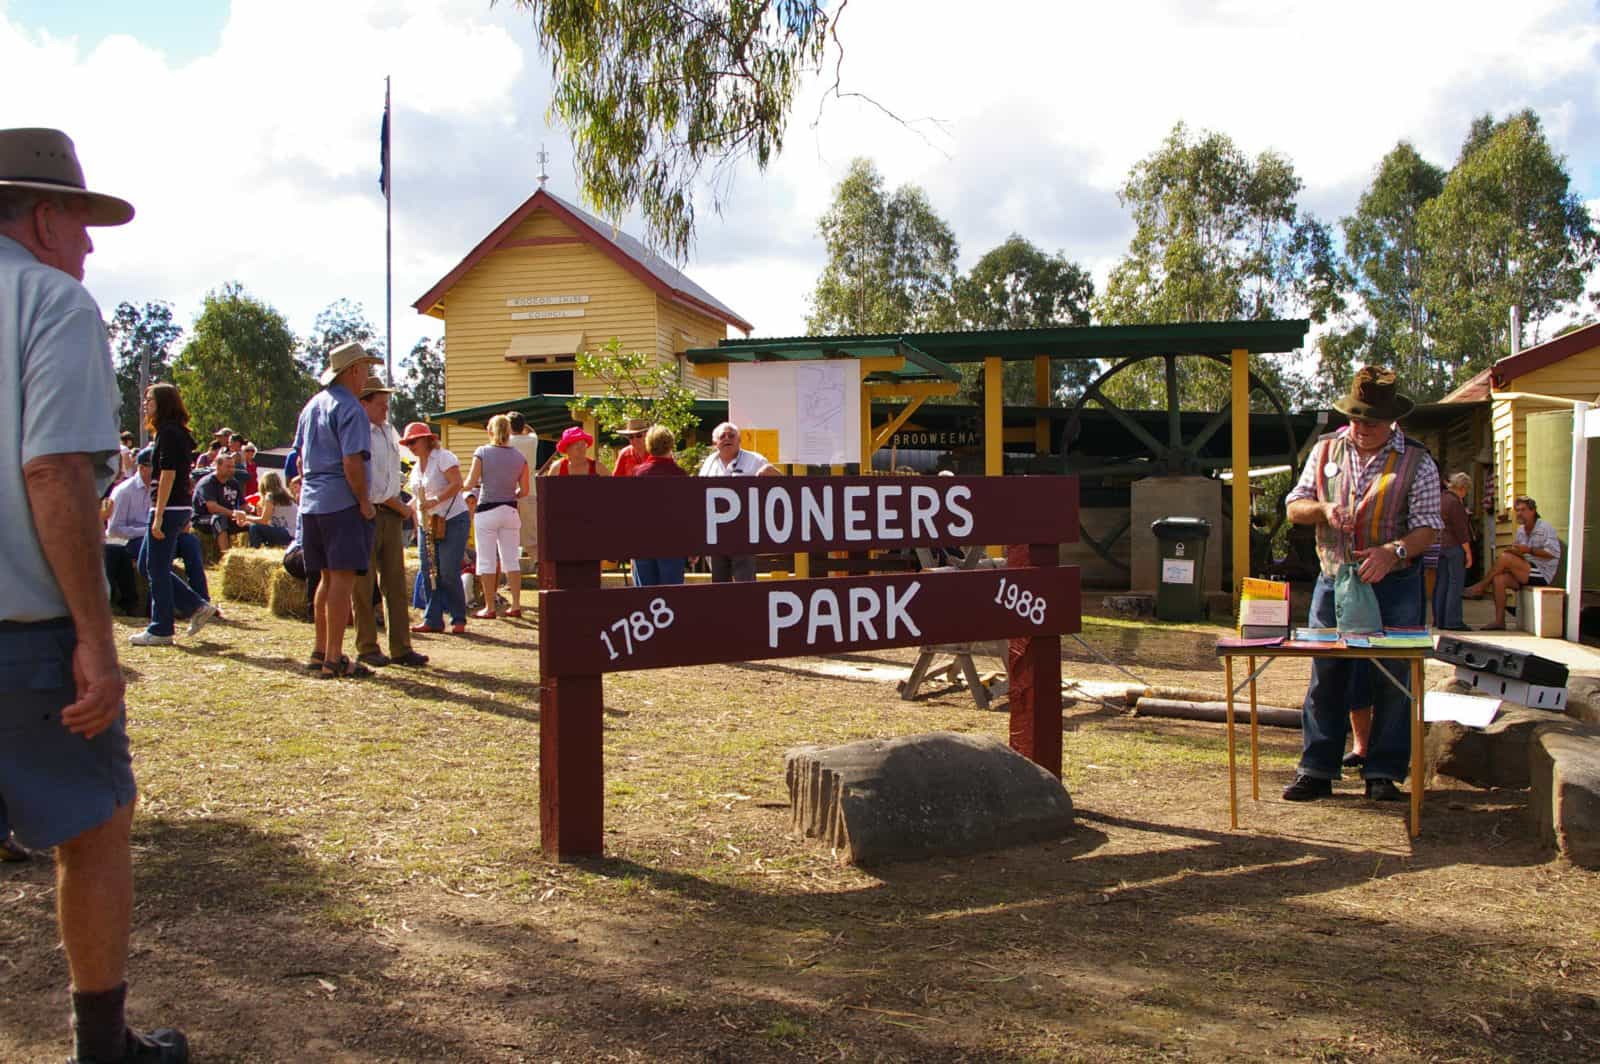 Pioneer Park has a wonderful historical village and museum